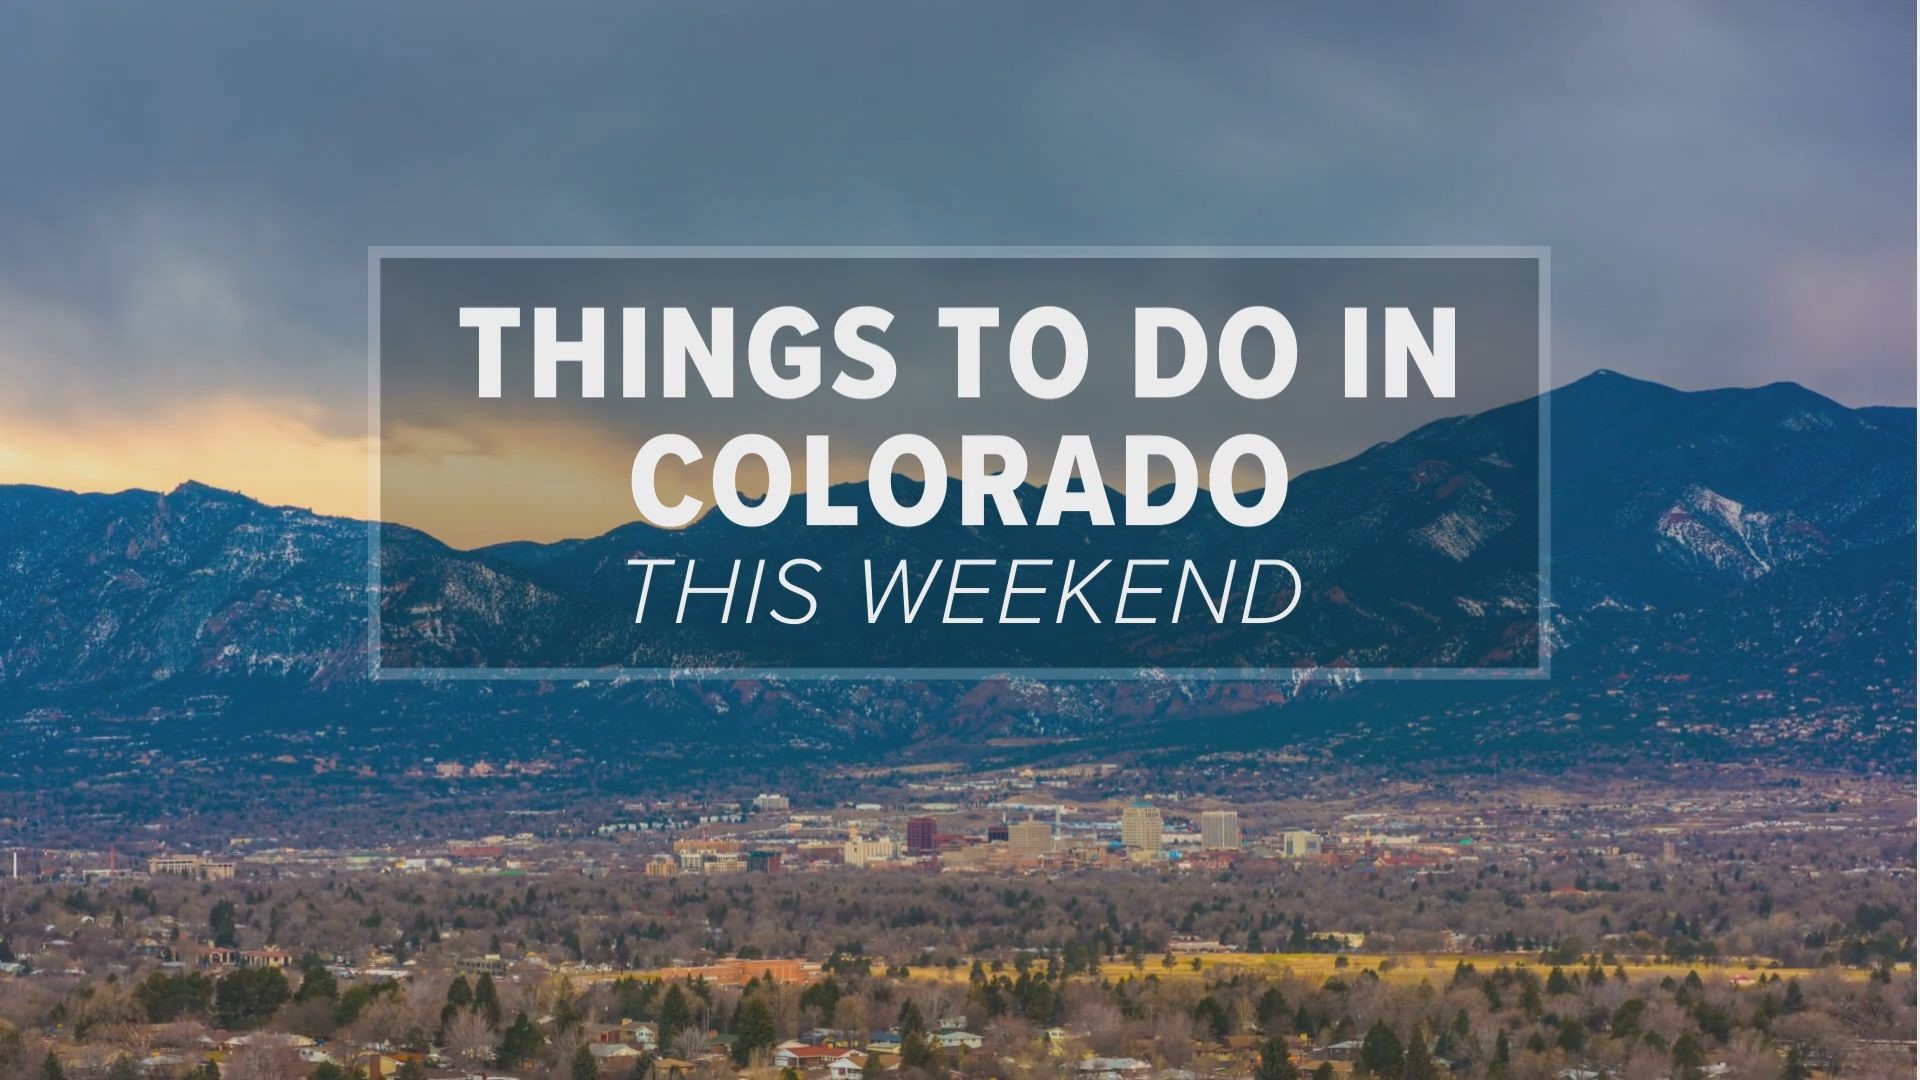 This March weekend in Colorado brings outdoor events, plus some great expos, shows and sporting events.